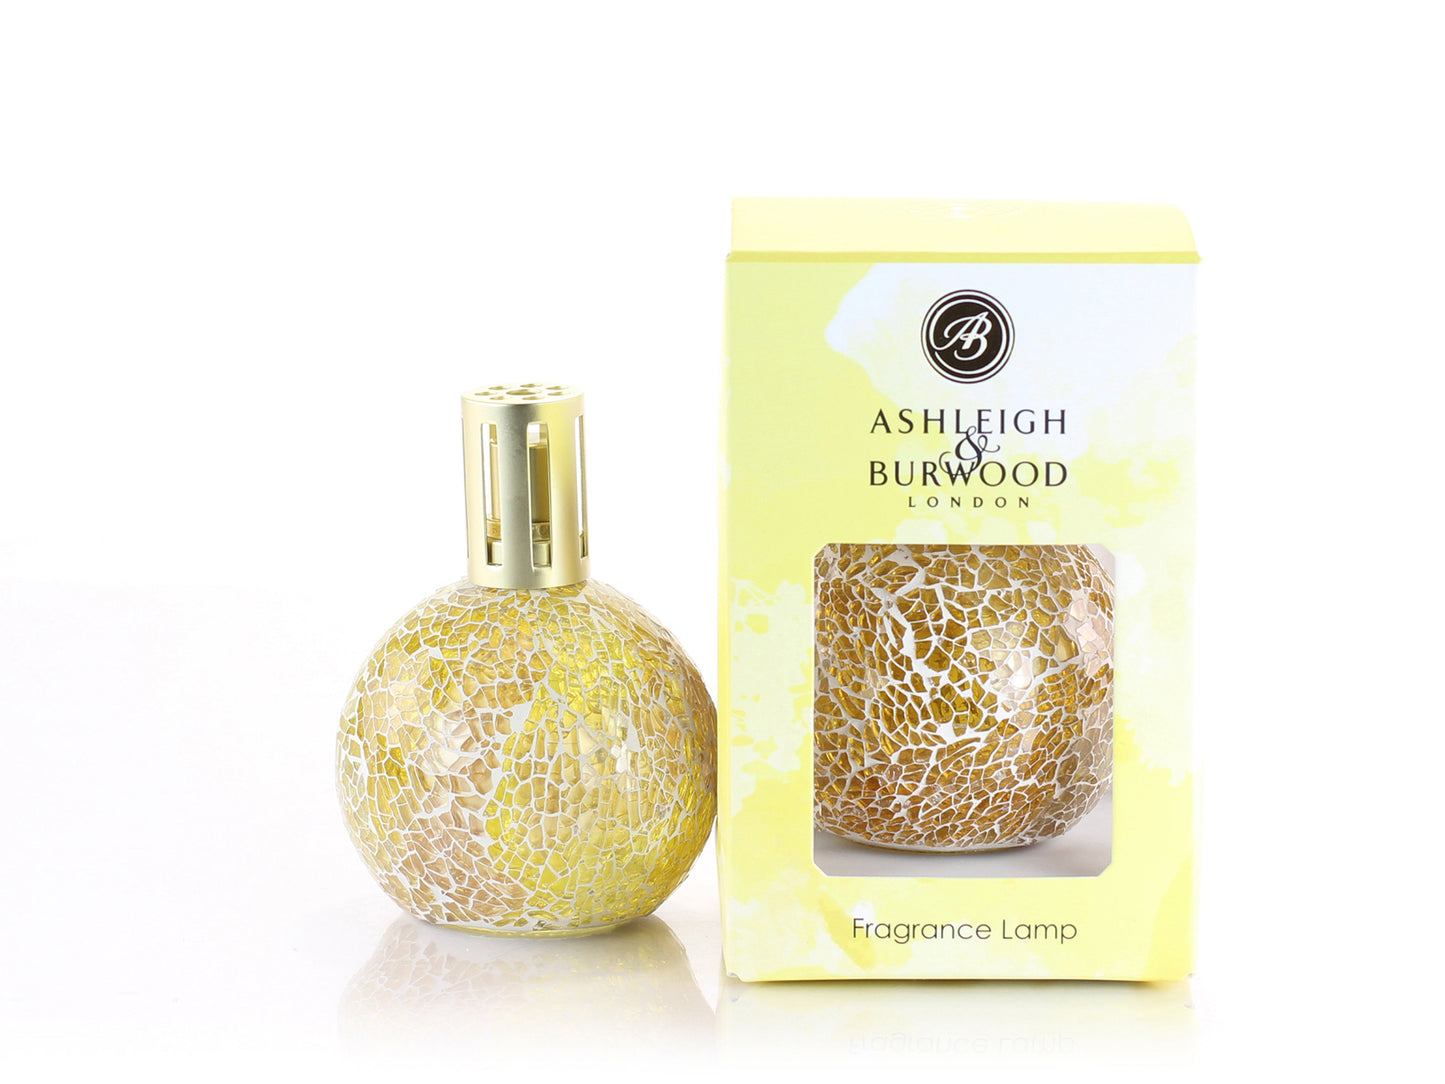 A yellow glass fragrance lamp made up of small pieces of glass set in a mosaic style, with a gold lid. It comes boxed in a yellow and white marbled box.